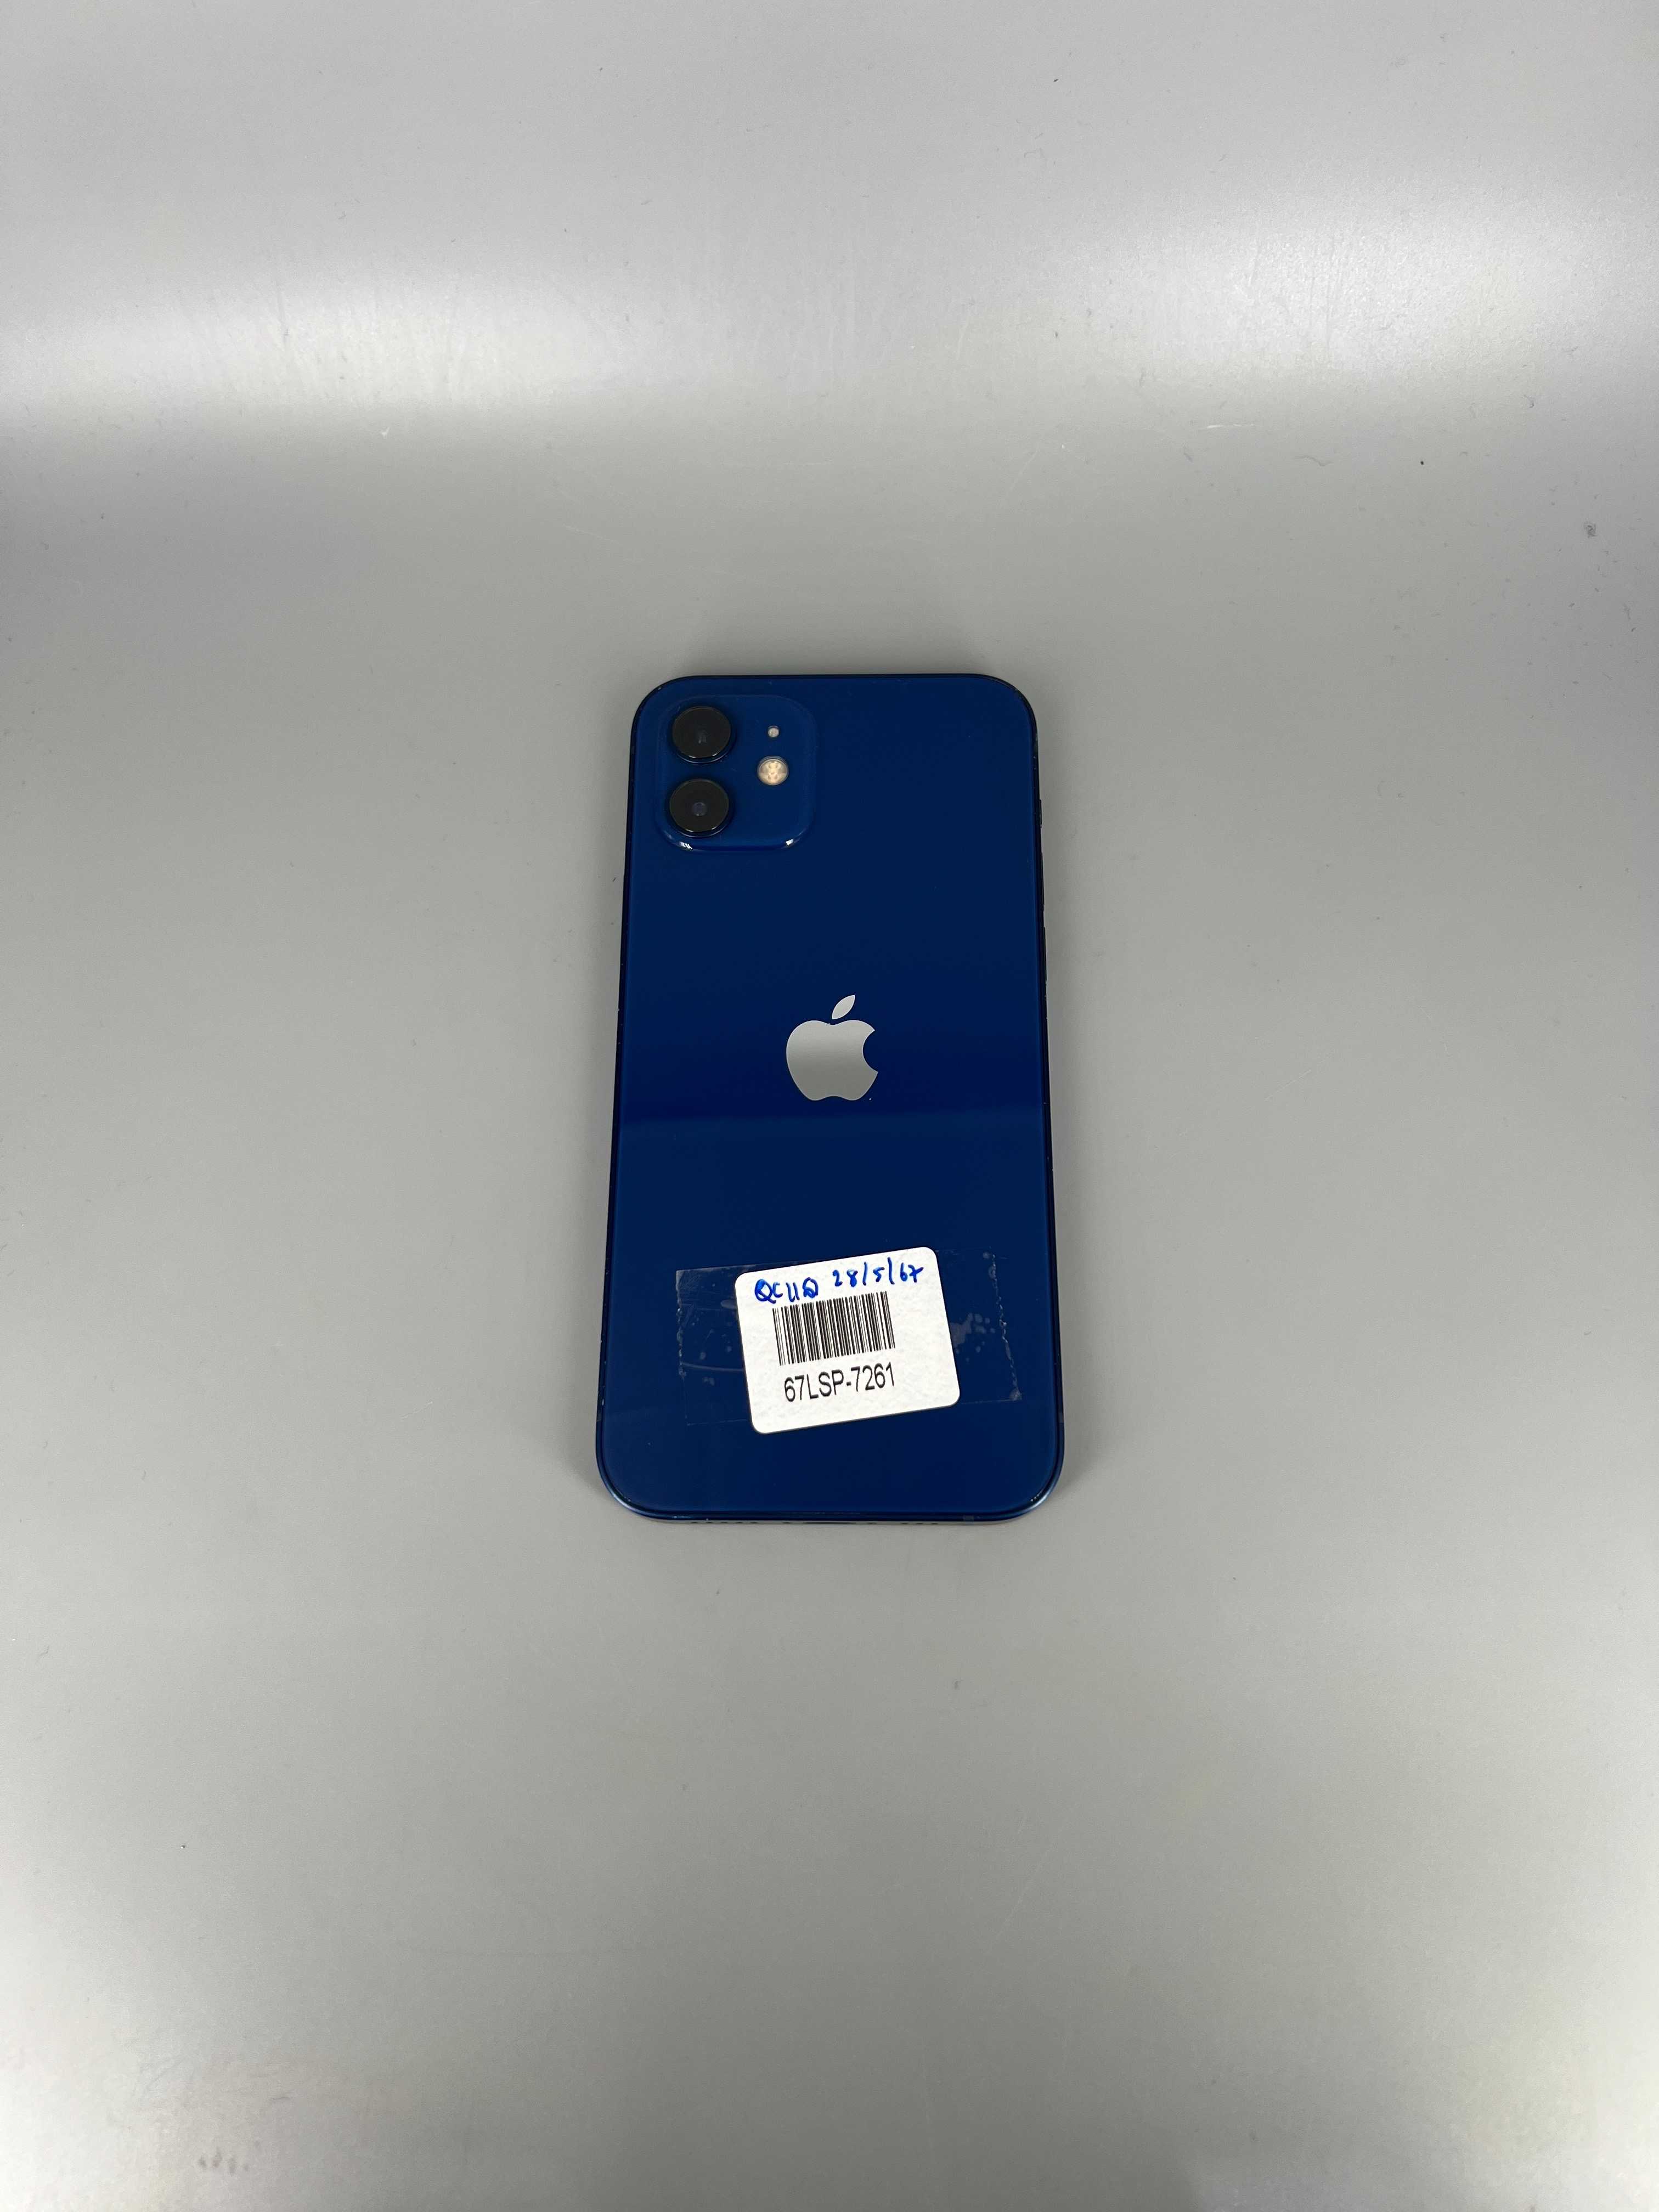 Used iPhone 12 64GB Blue 67LSP-7261